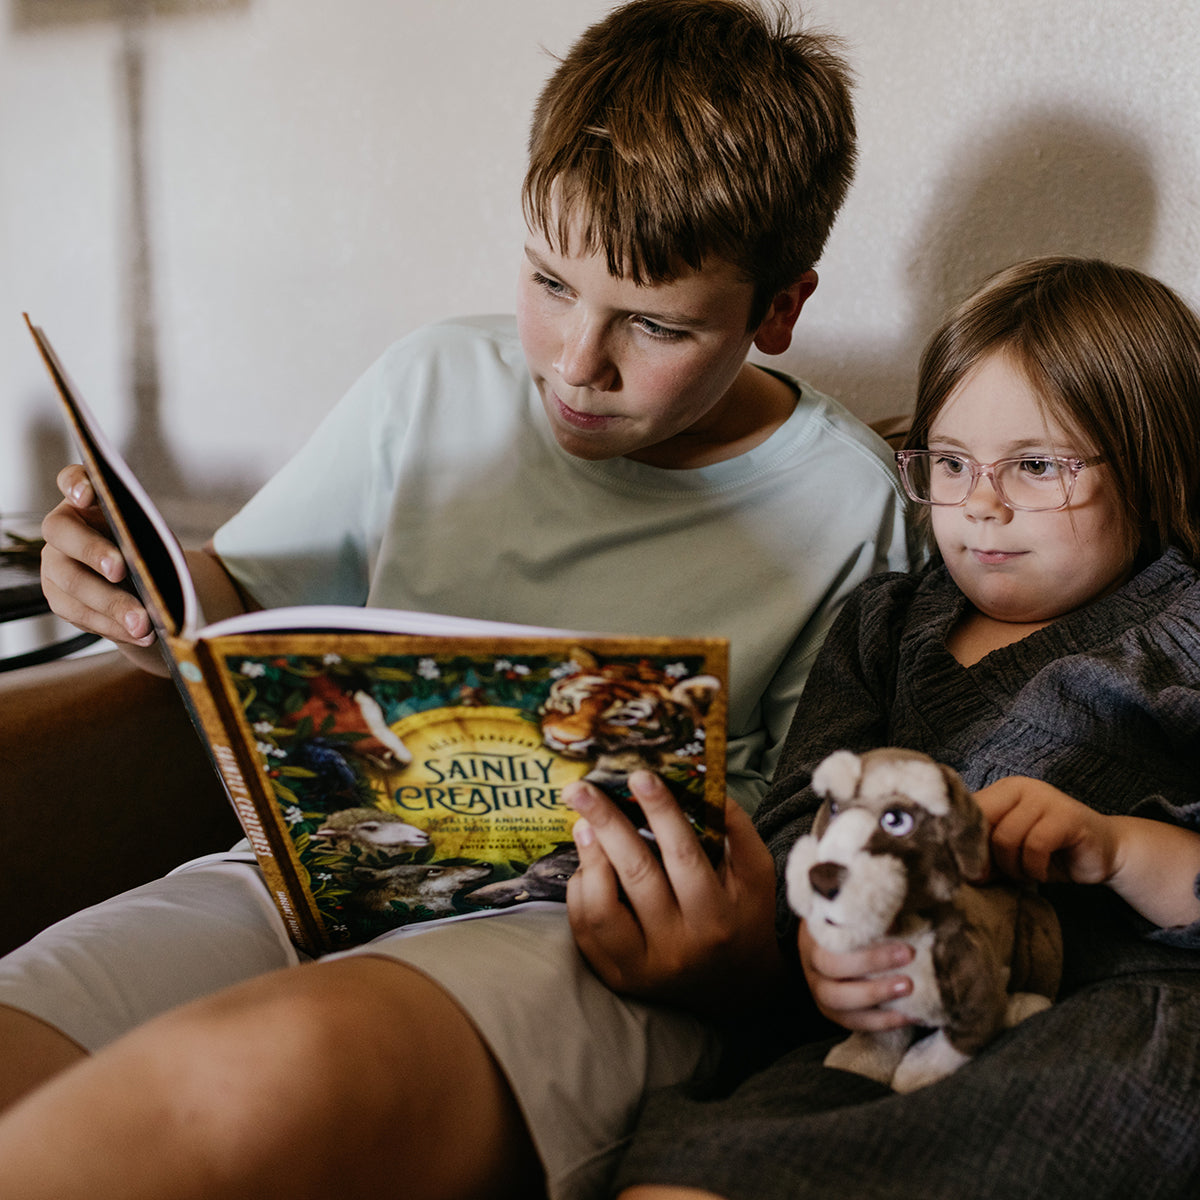 Saintly Creatures Son and Daughter Reading Book